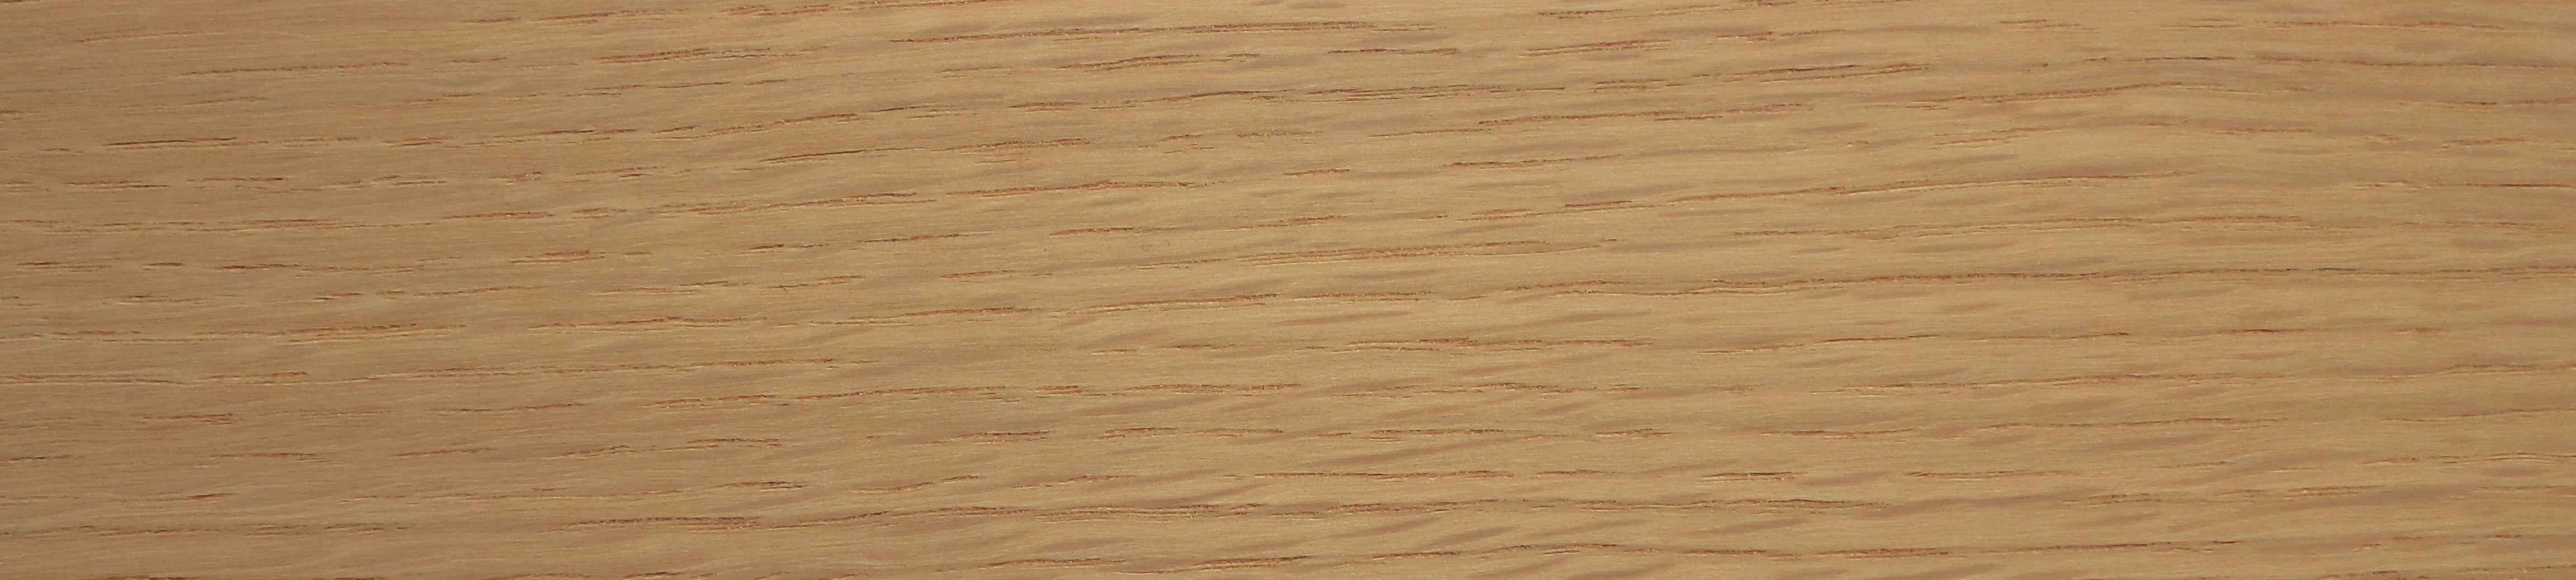 American White Oak Pre-glued Edging / Lipping 50mm x 1mm Thick Wood Edging x 100 Metres **NOT IRON ON**